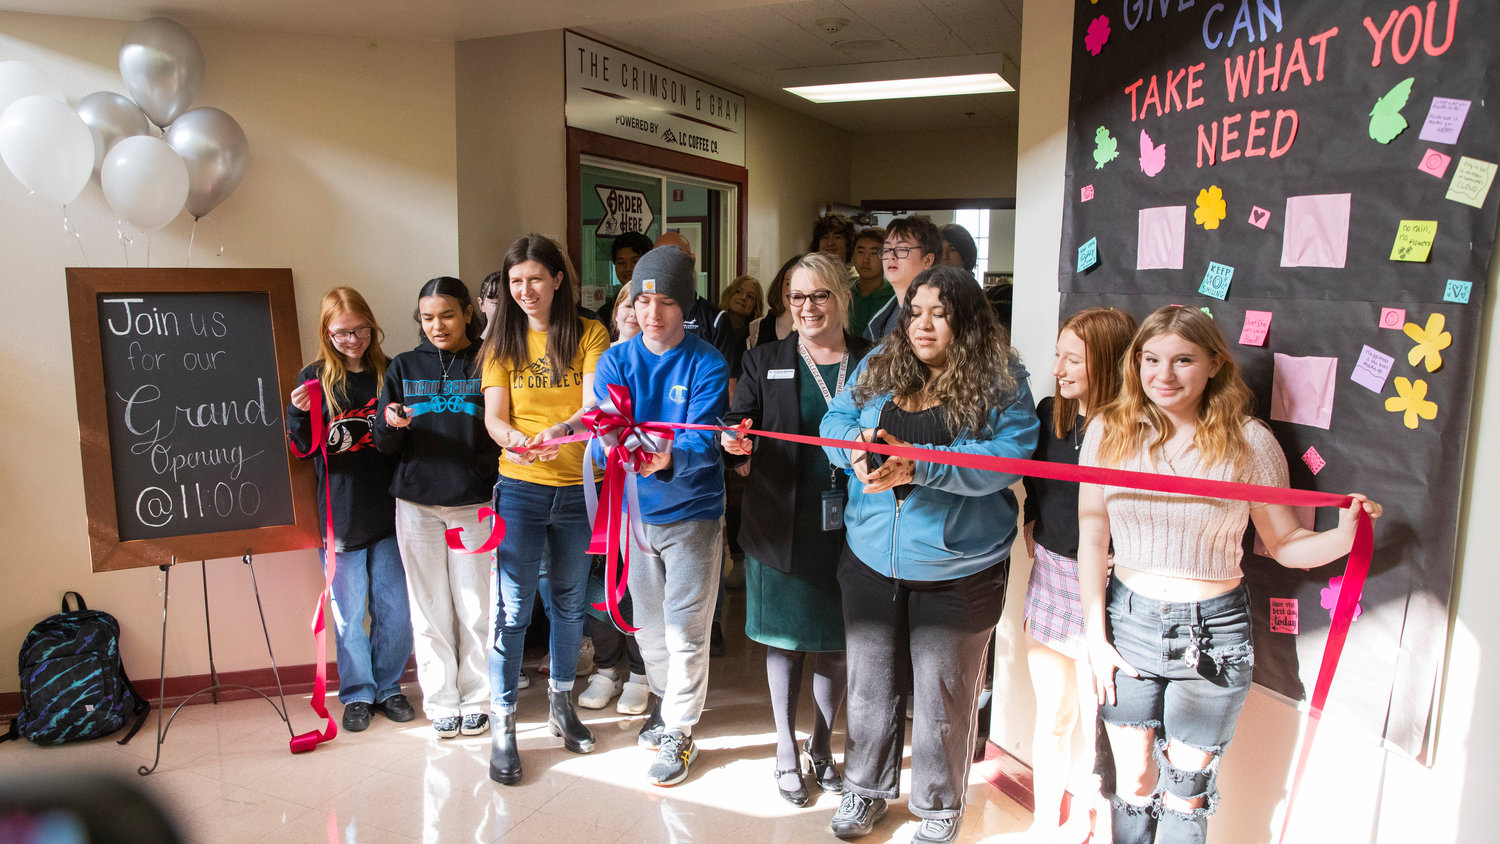 W.F. West High School hosts a ribbon cutting ceremony on Wednesday for a new student store "The Crimson & Gray," powered by Lewis County Coffee Co. in Chehalis.